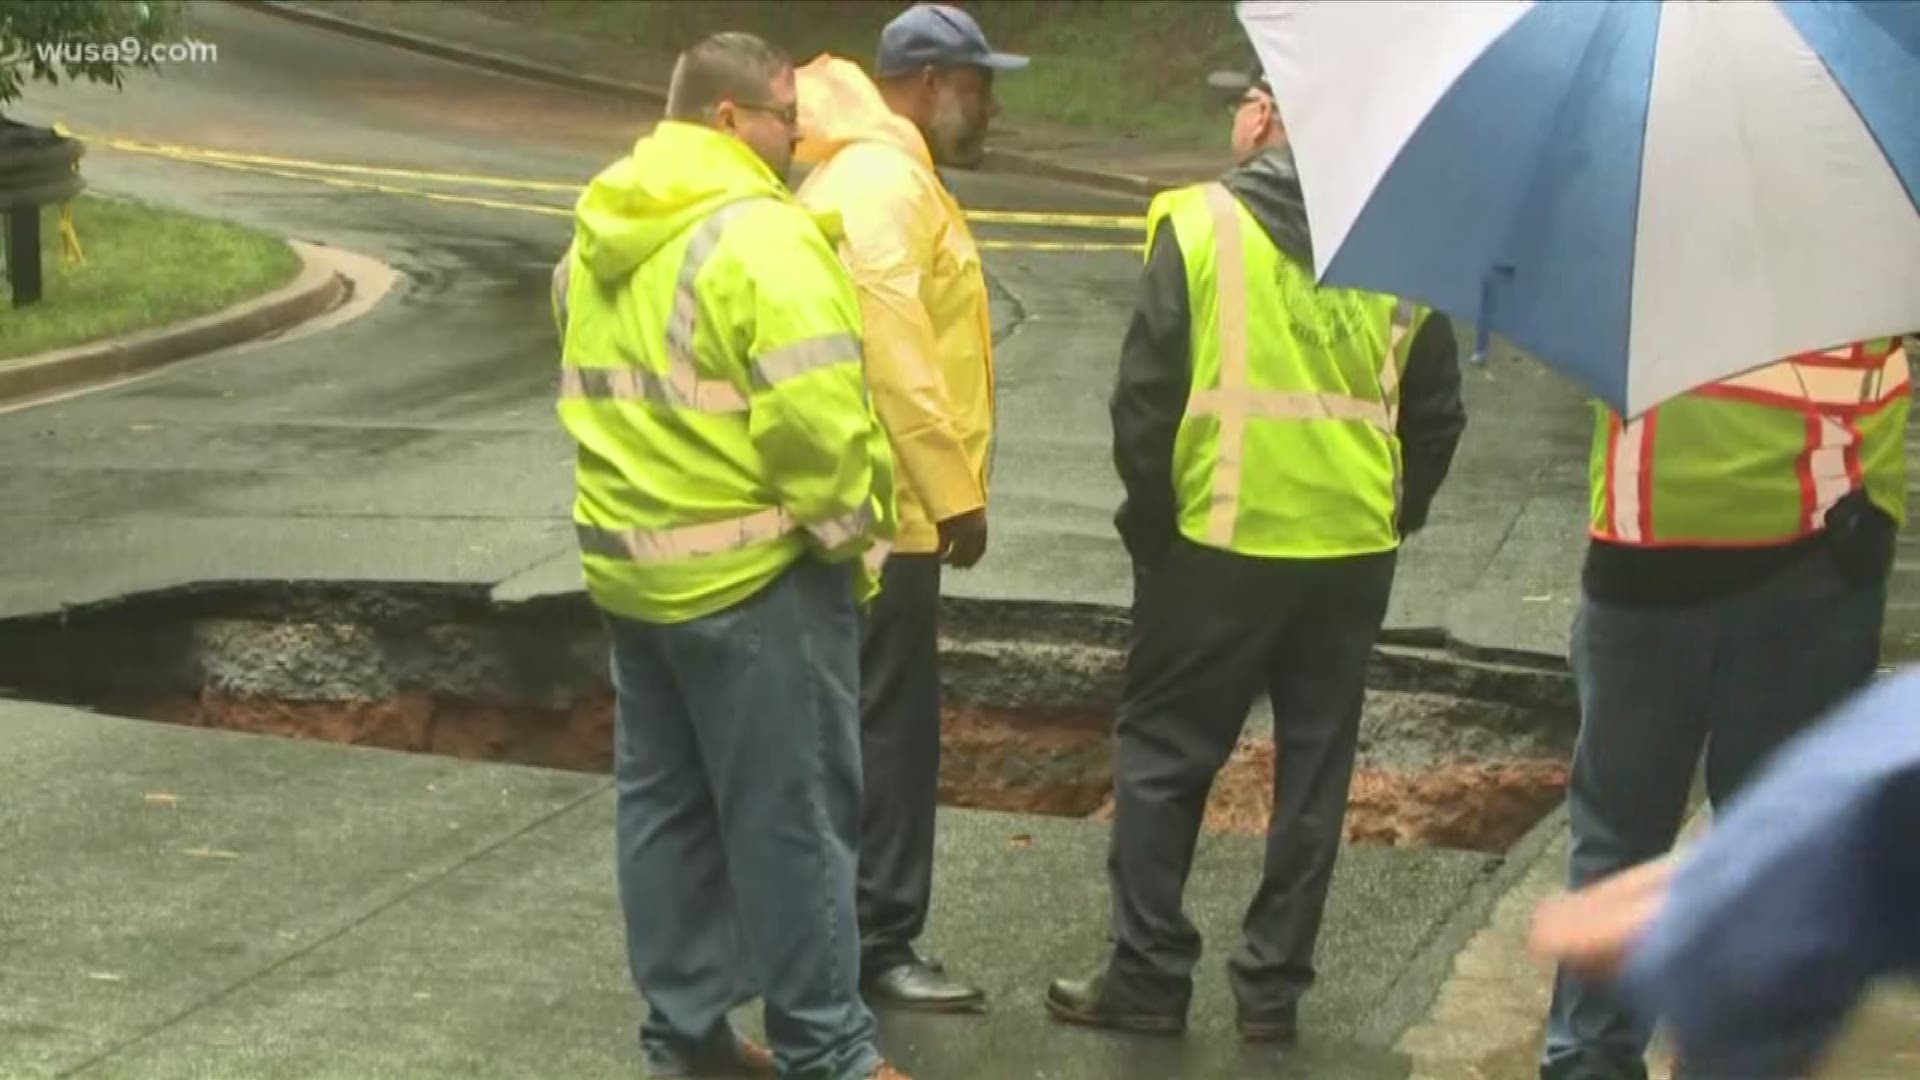 On Rockwood Creek in Potomac, Maryland, there is a massive sinkhole. Debris got stuck in the pipe underneath of the roadway and caused a sinkhole. Residents are unable to get home.